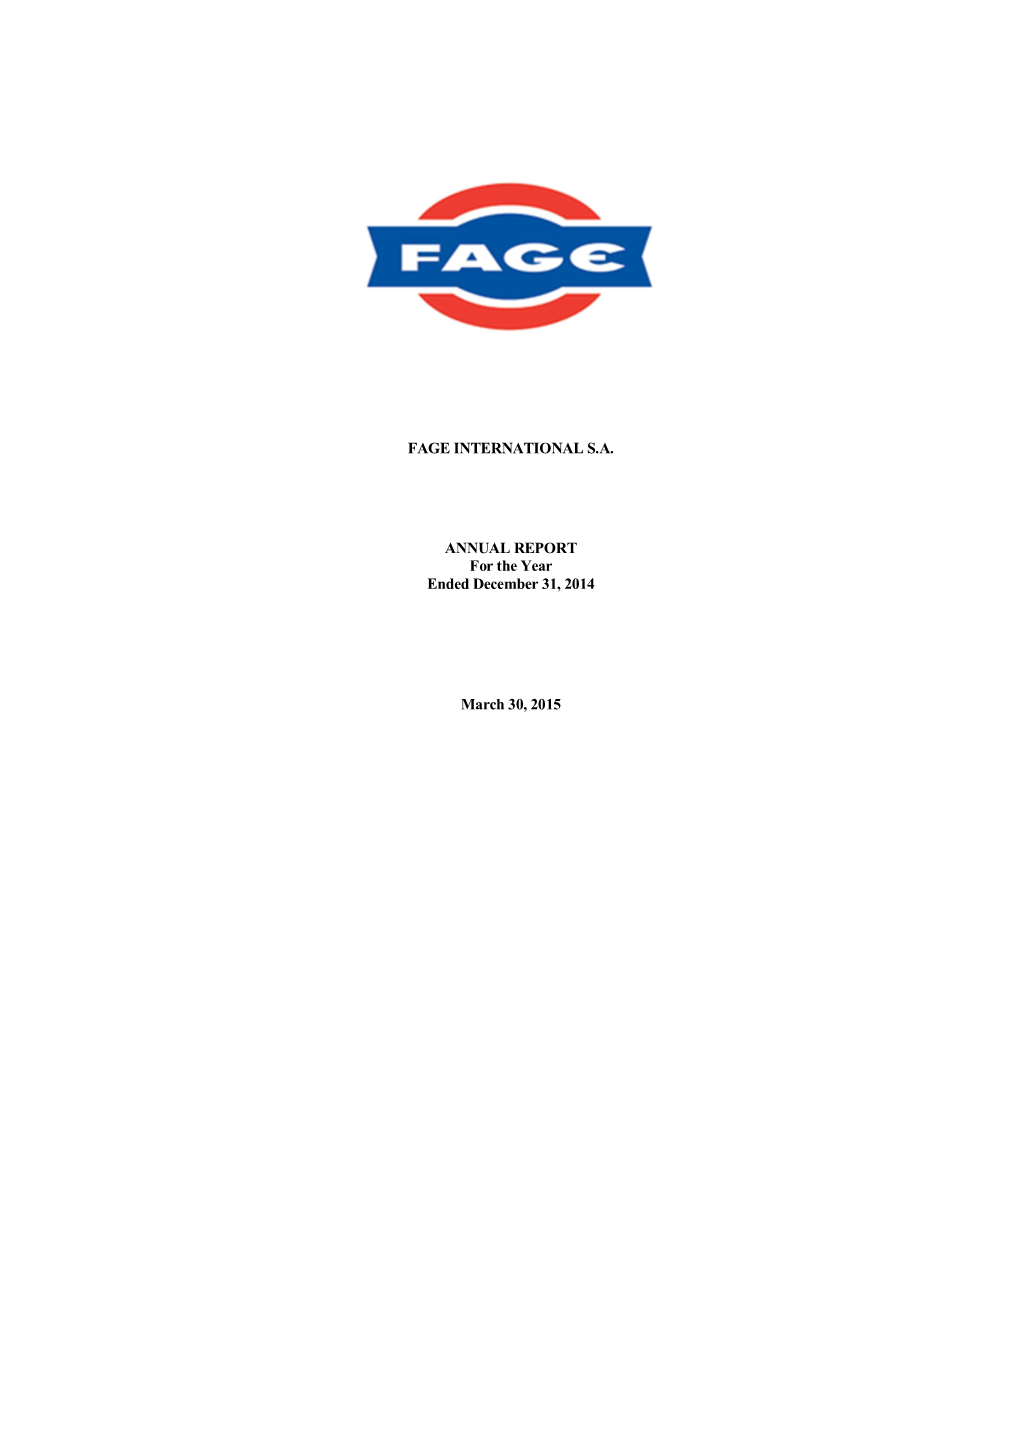 FAGE INTERNATIONAL S.A. ANNUAL REPORT for The